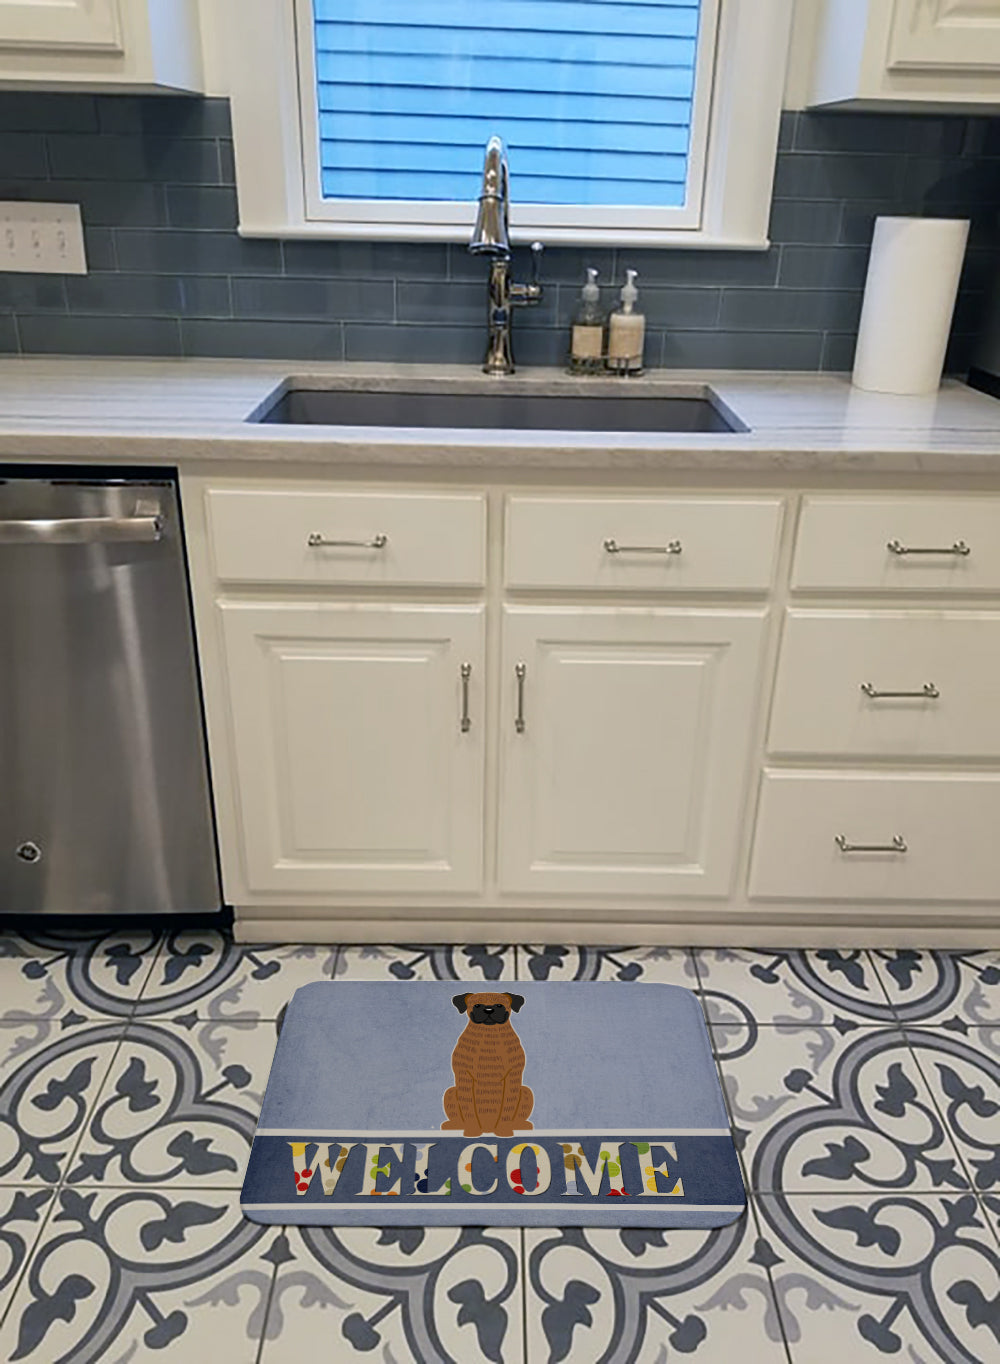 Brindle Boxer Welcome Machine Washable Memory Foam Mat BB5698RUG - the-store.com